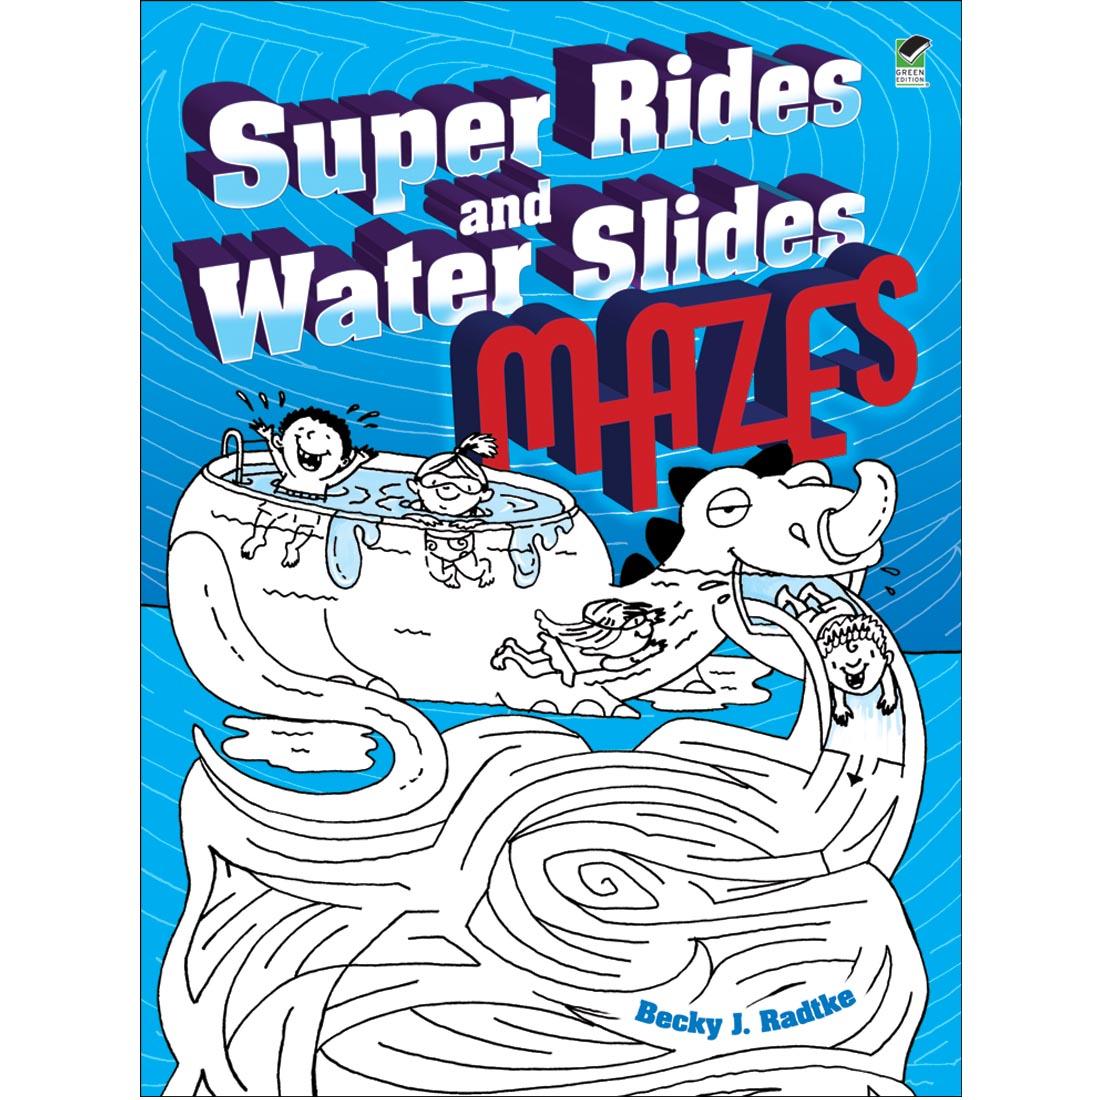 Super Rides and Water Slides Mazes by Dover